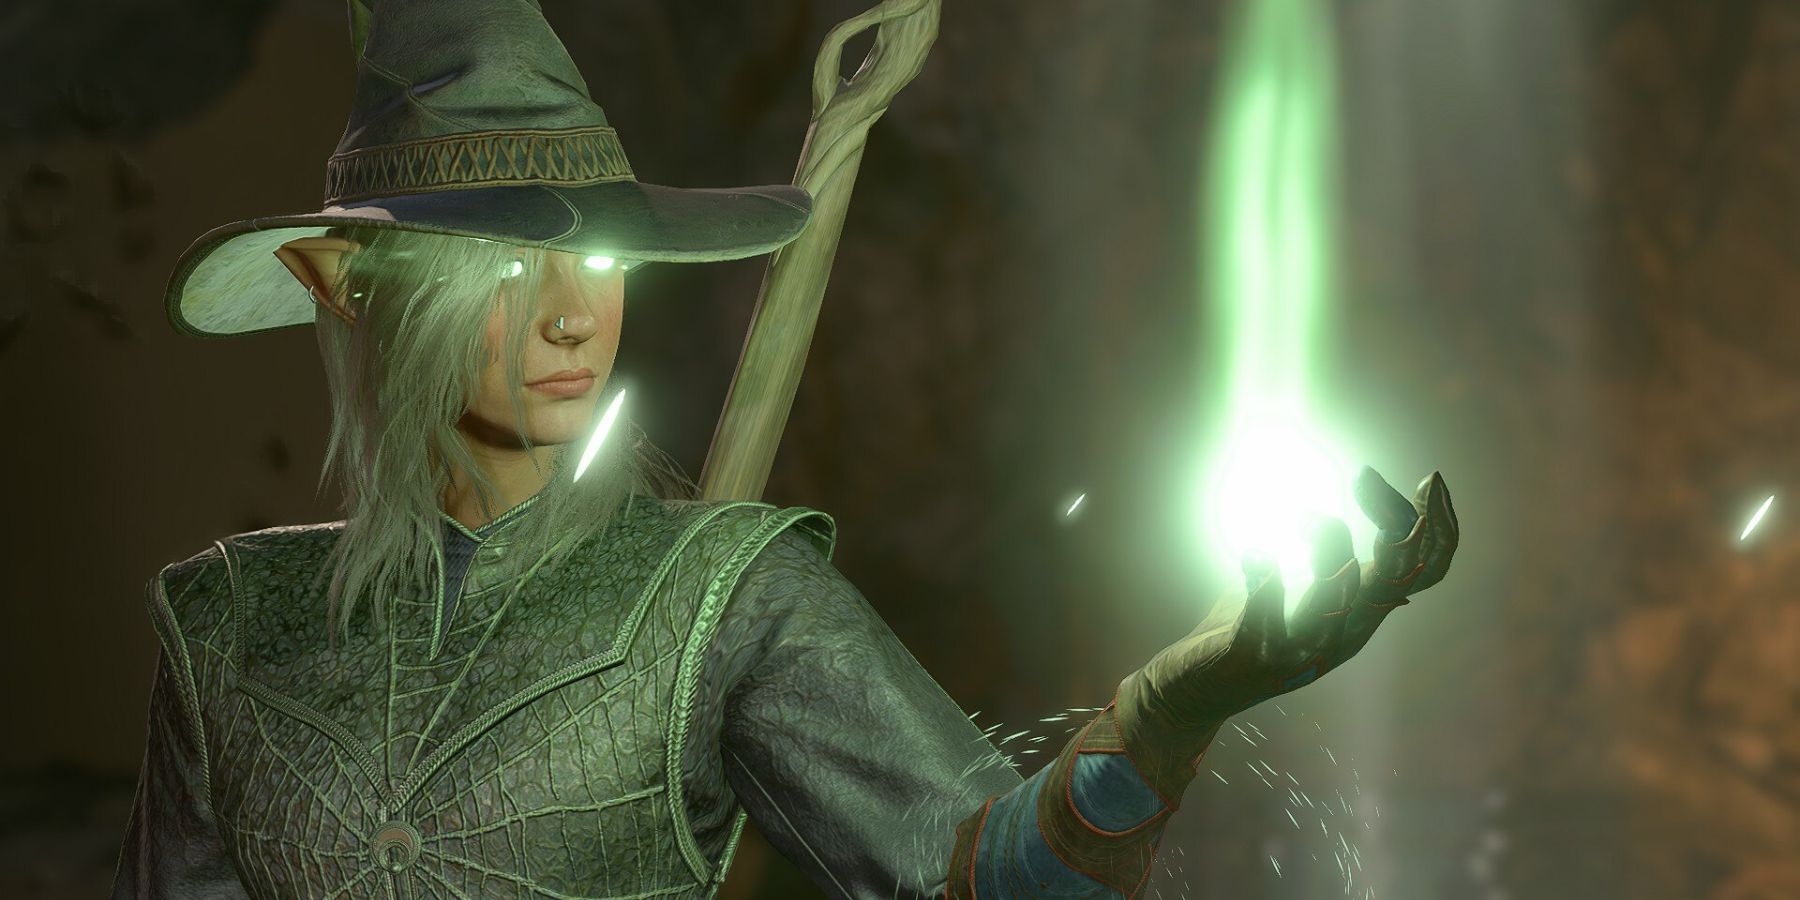 Baldur's Gate 3: the character is casting a spell